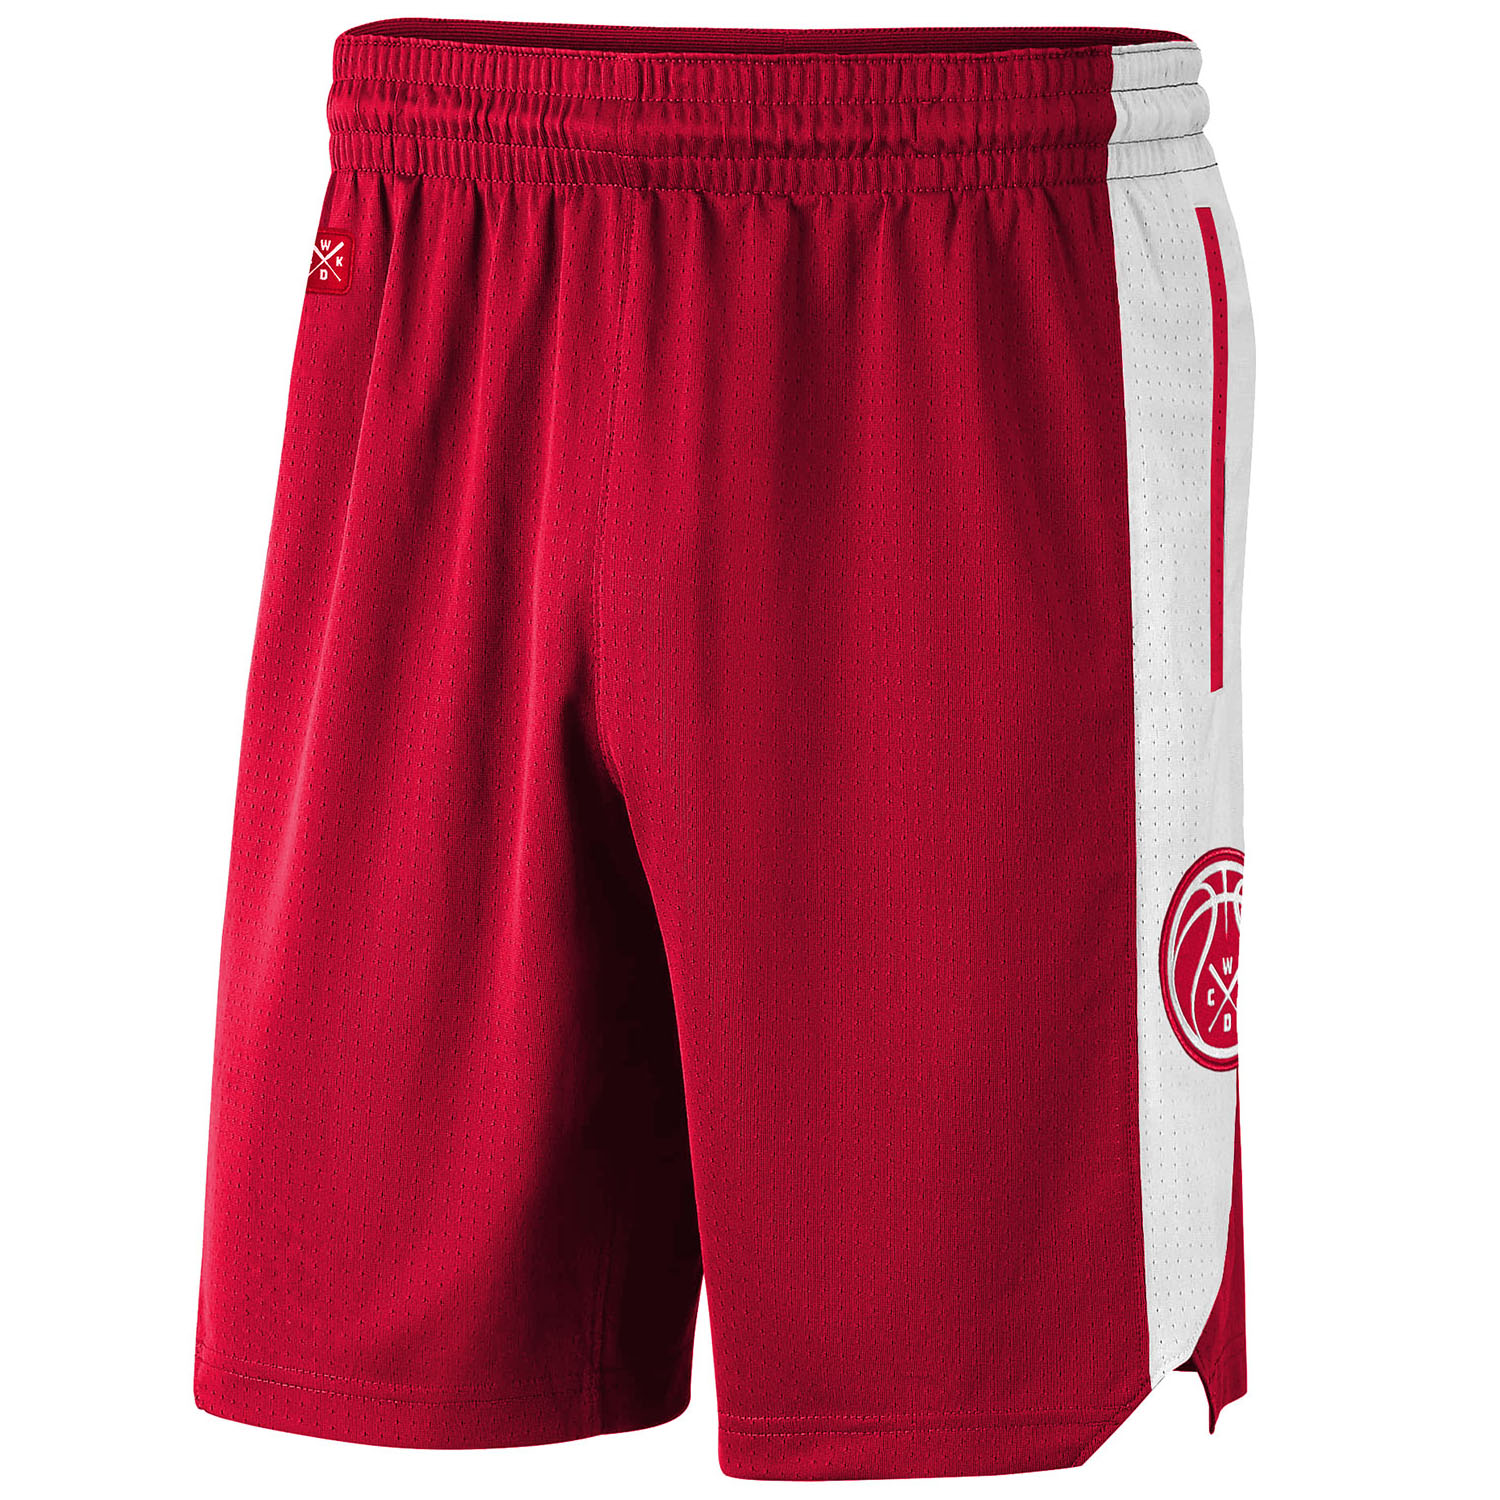 WICKED ONE Fitness Shorts, Playoffs, red-white, M